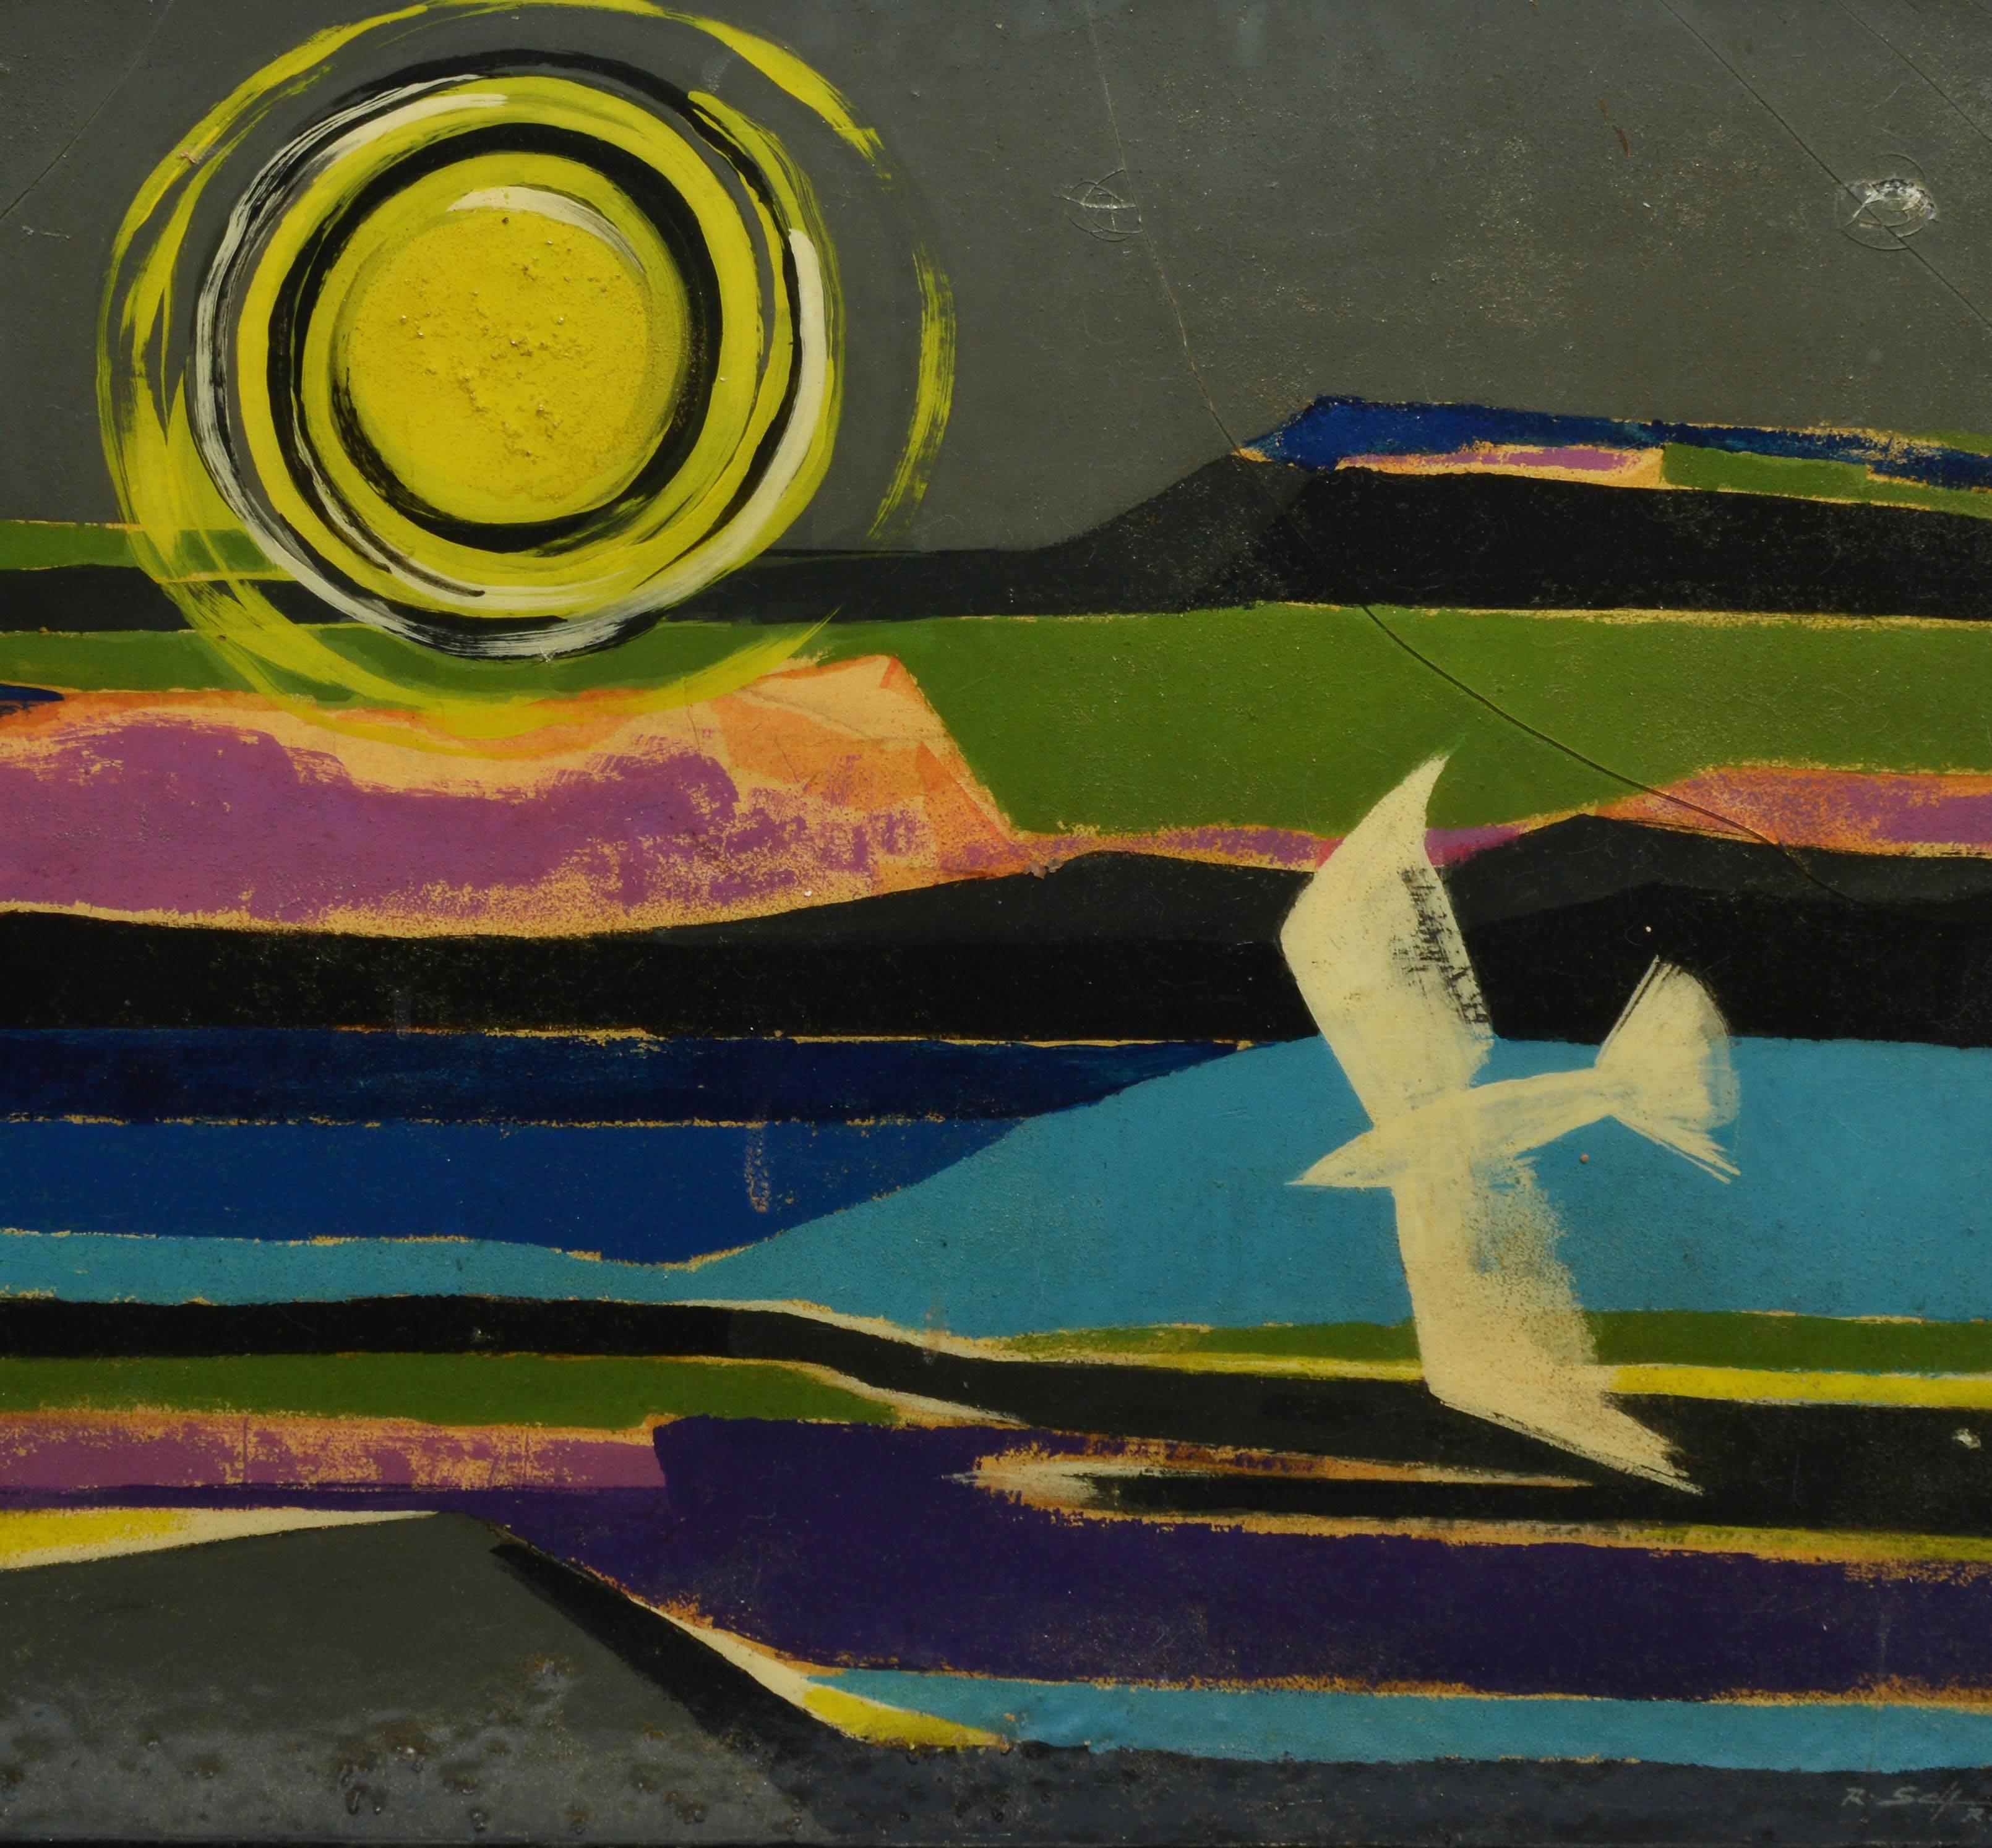 Modernist Abstracted Landscape with Flying Bird - Painting by Unknown